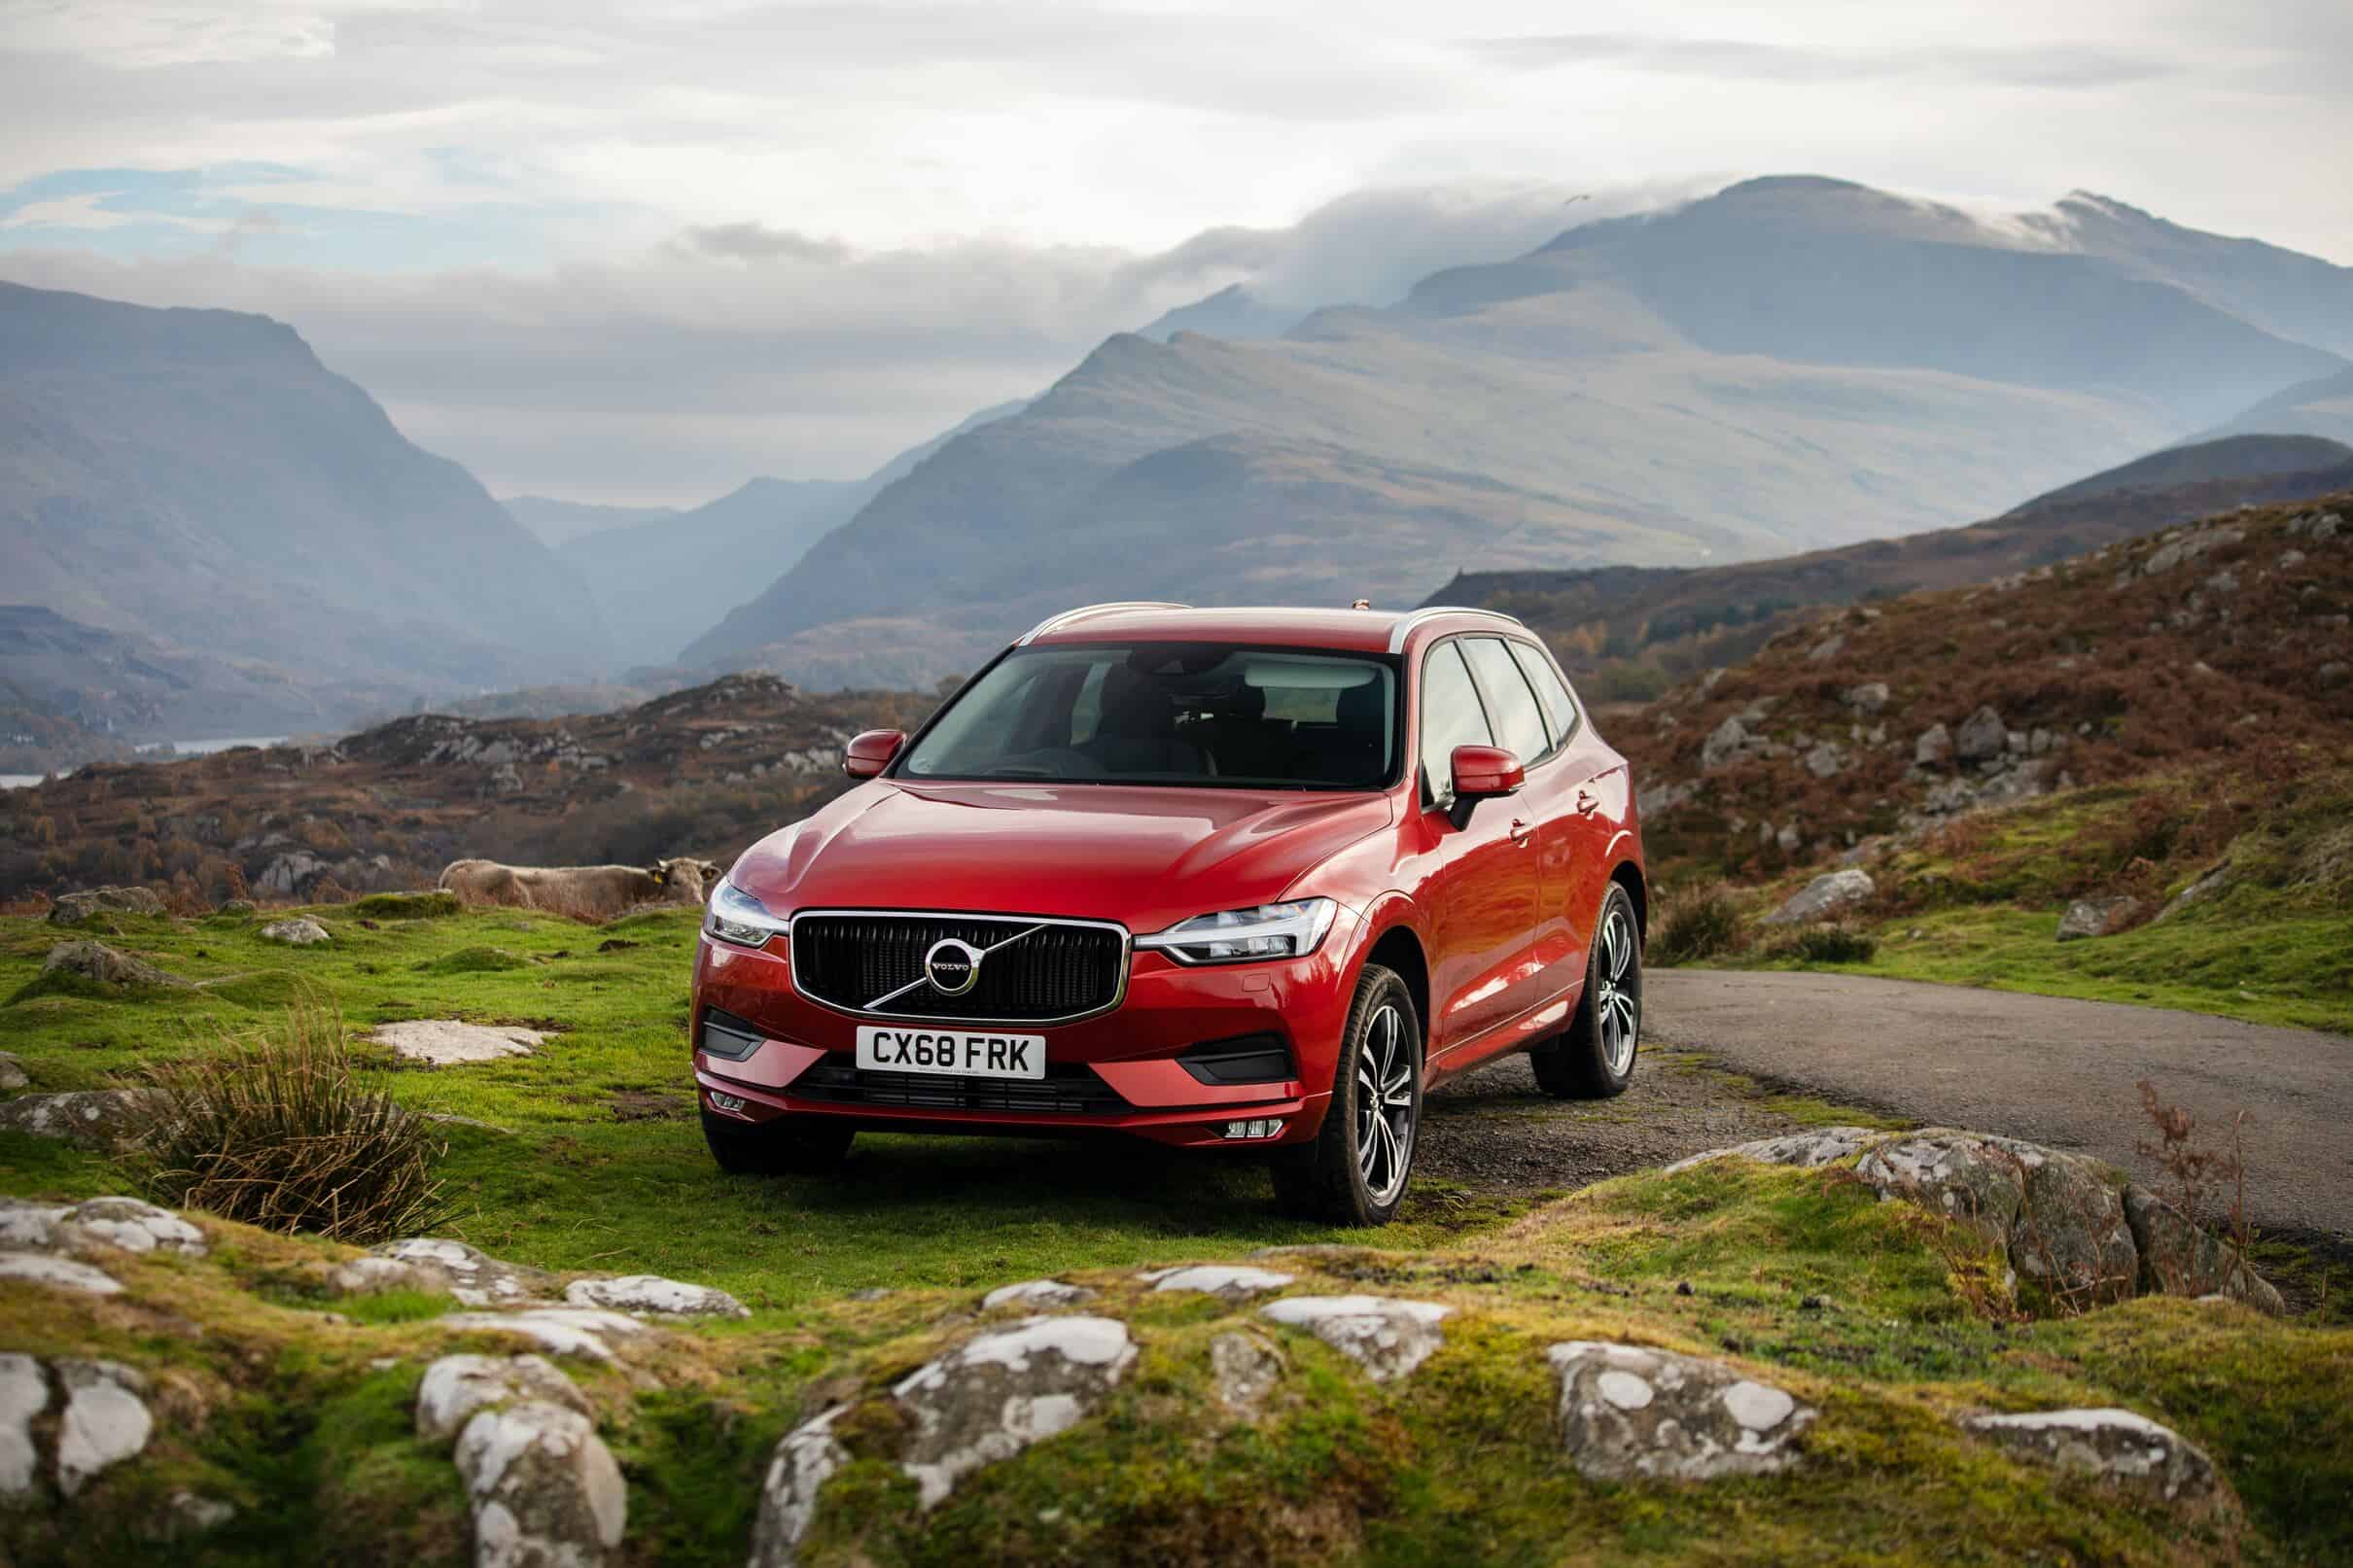 A red Volvo XC60 parked in a scenic setting.